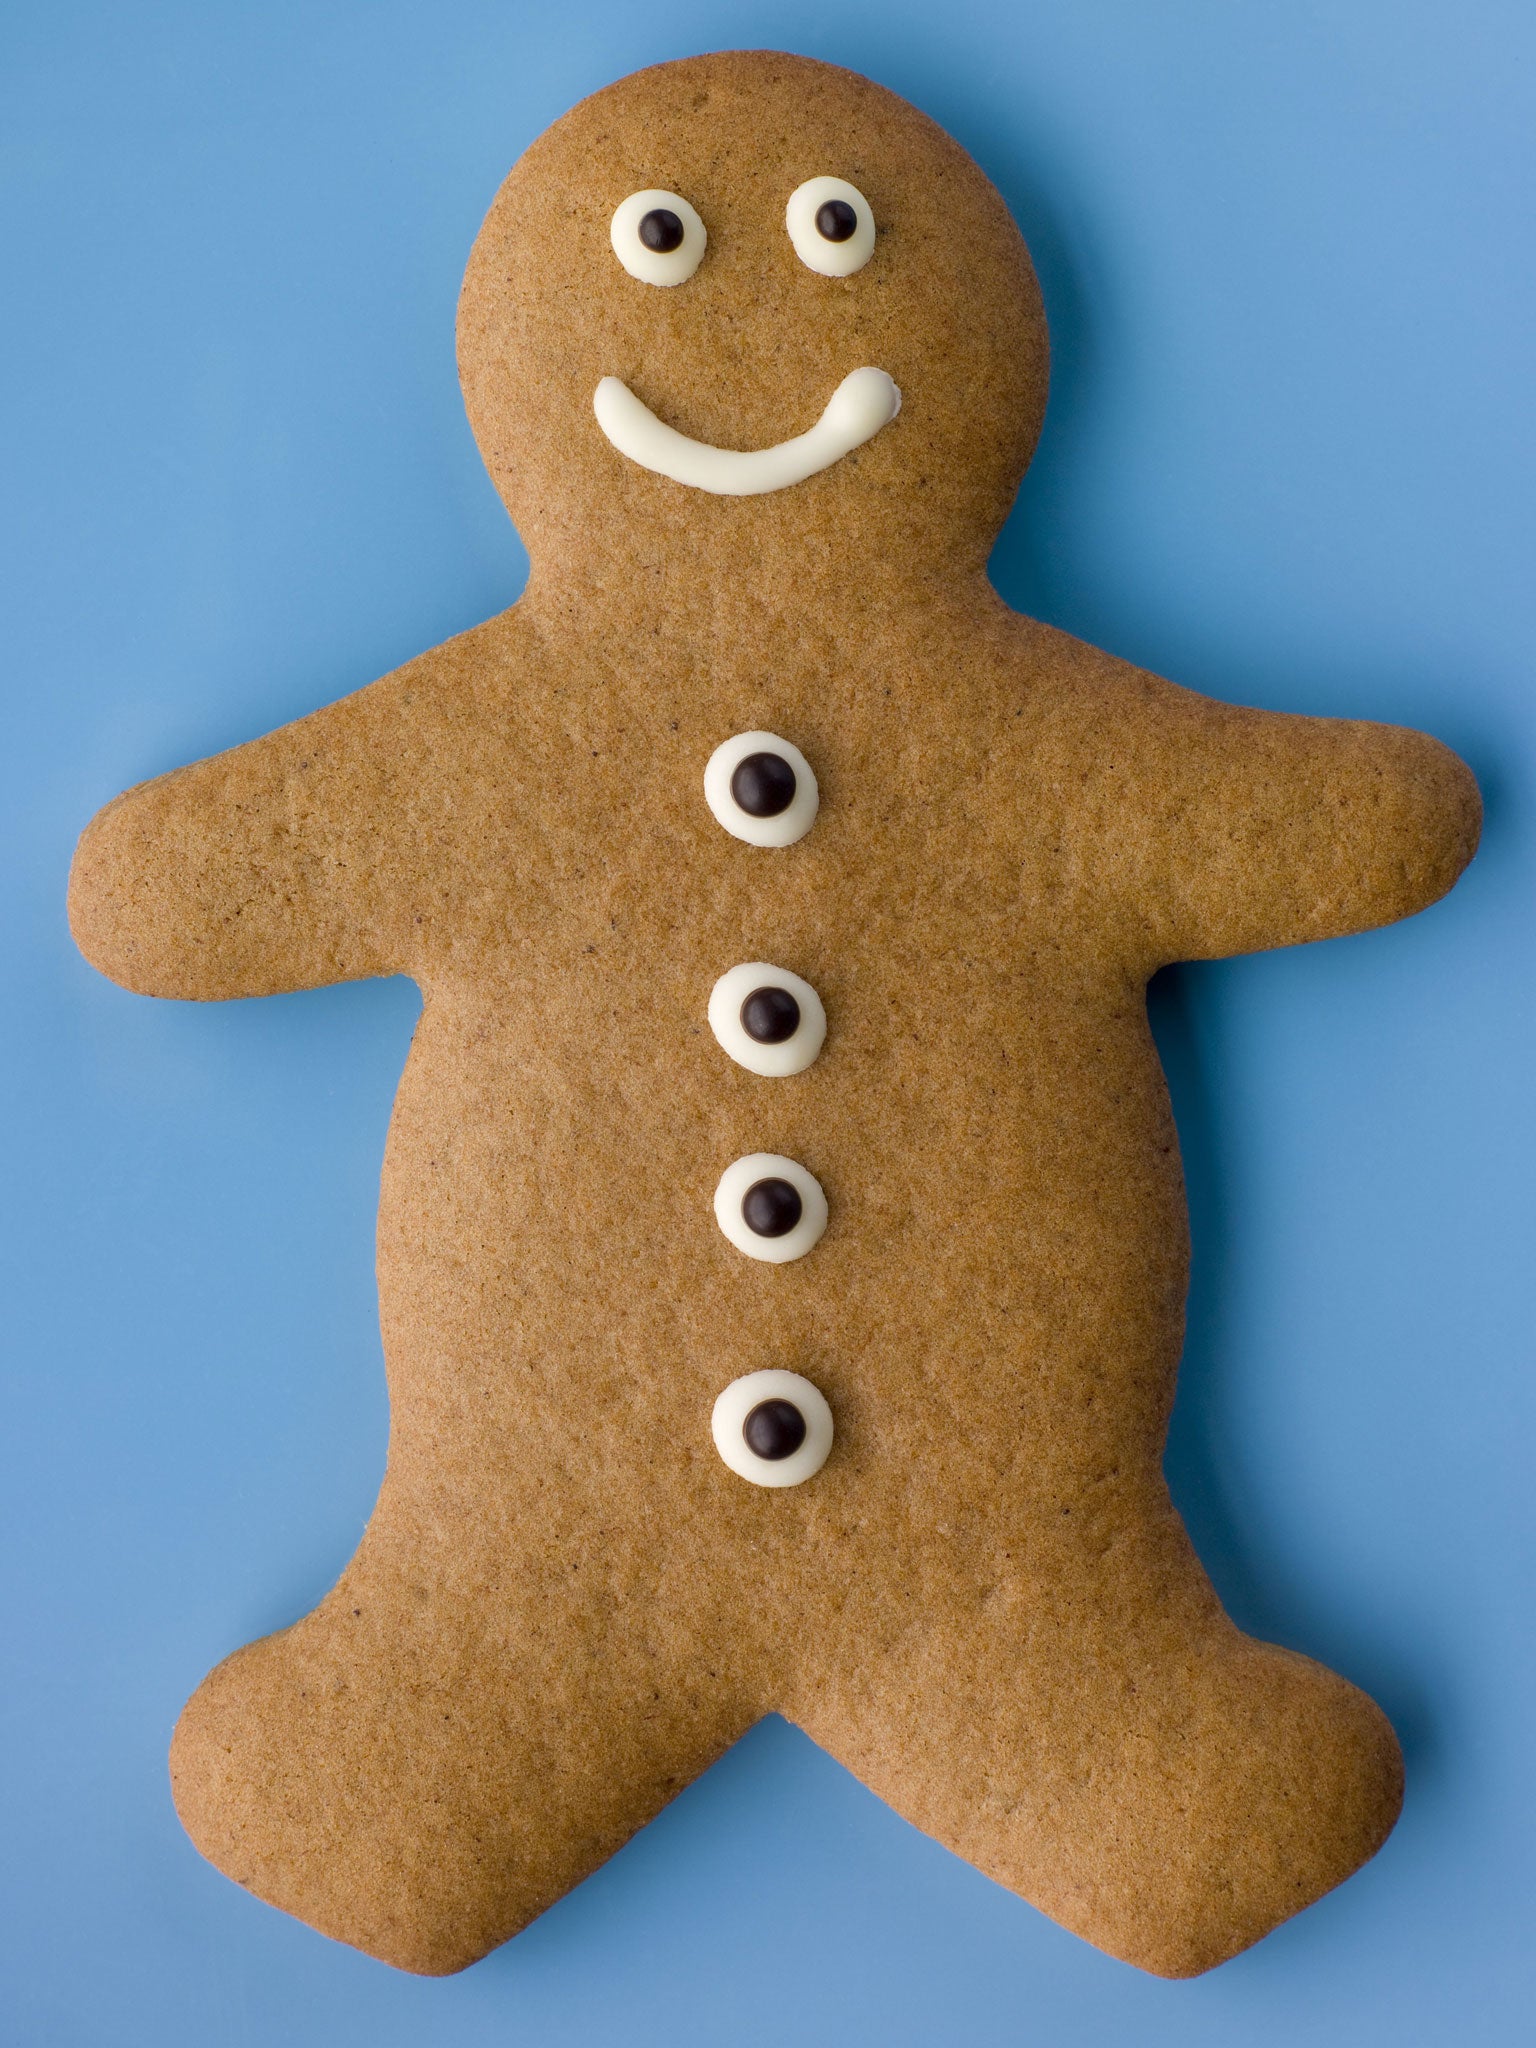 Gingerbread men: The most famous creation from ginger